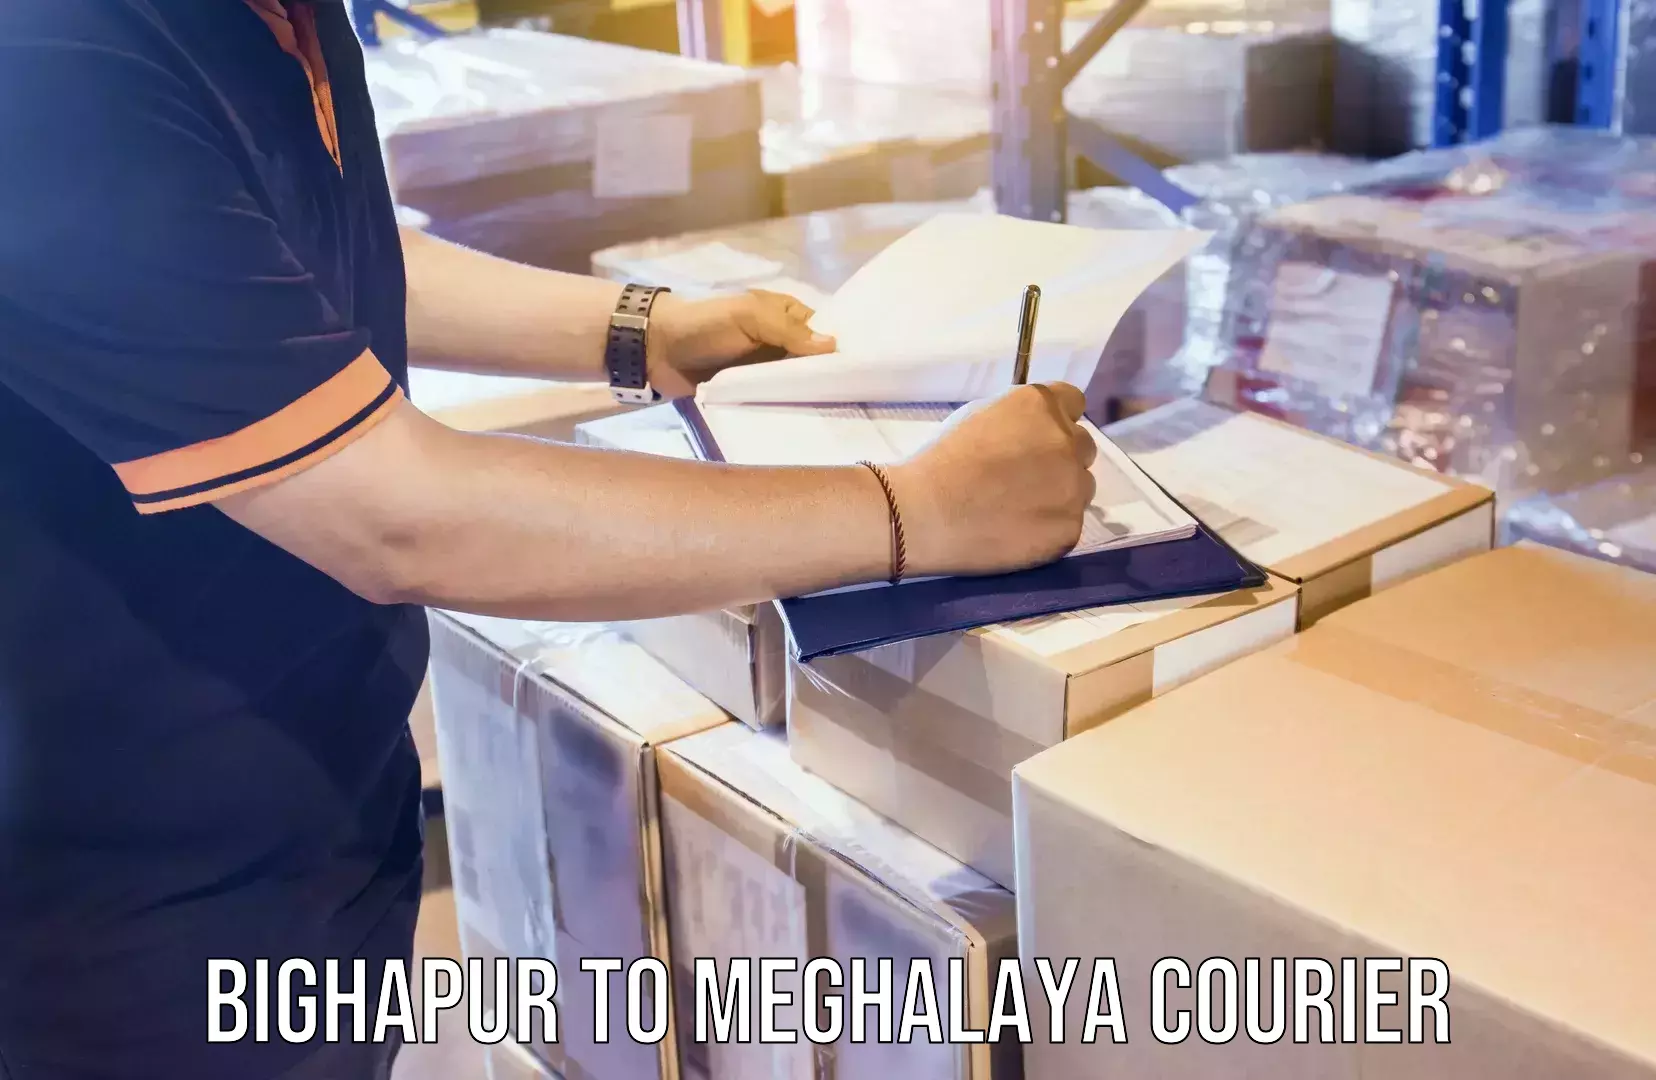 Nationwide delivery network Bighapur to Meghalaya